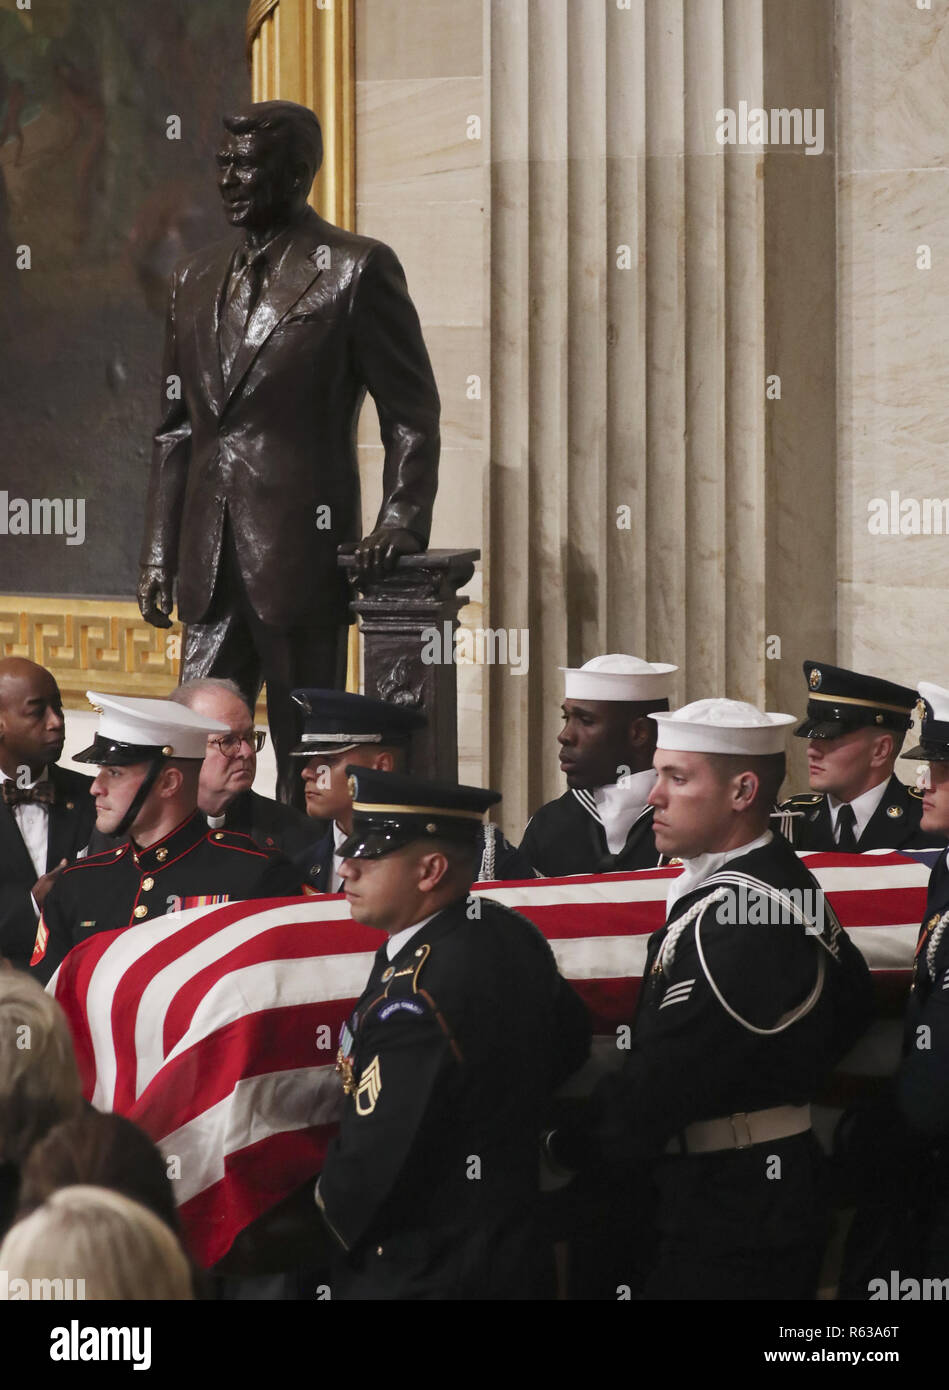 Washington, District of Columbia, USA. 3rd Dec, 2018. A U.S. military honor guard carries the casket of former U.S. President George H.W. Bush past the statue of former President Ronald Reagan as it arrives to lie in state in the U.S. Capitol Rotunda in Washington, U.S., December 3, 2018. REUTERS/Jonathan Ernst/Pool Credit: Jonathan Ernst/CNP/ZUMA Wire/Alamy Live News Stock Photo